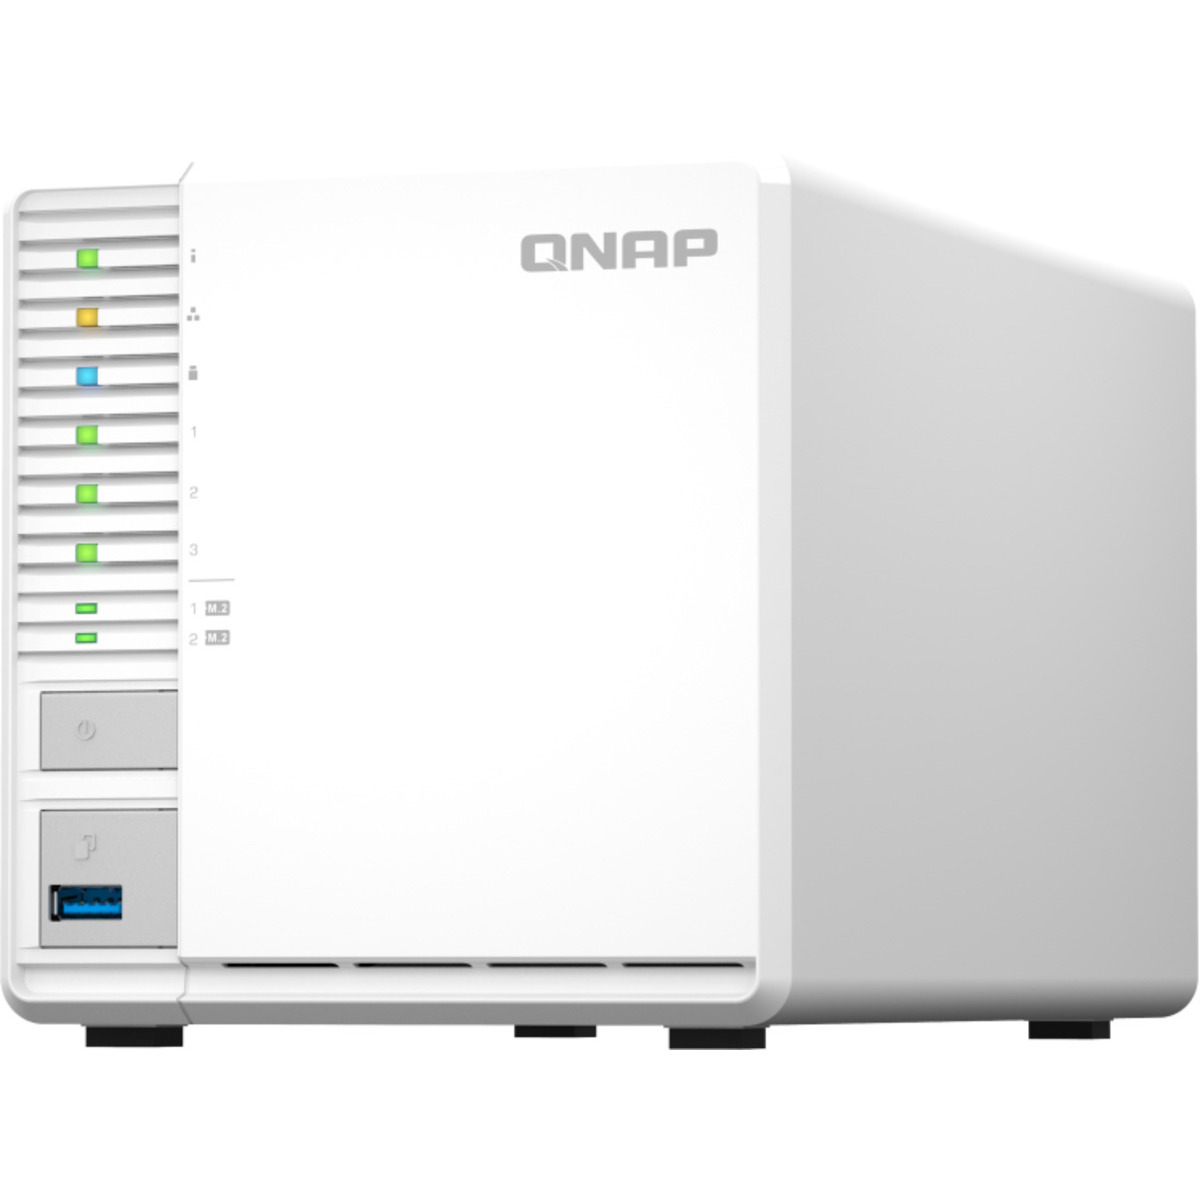 buy QNAP TS-364 48tb Desktop NAS - Network Attached Storage Device 3x16000gb Seagate IronWolf Pro ST16000NT001 3.5 7200rpm SATA 6Gb/s HDD NAS Class Drives Installed - Burn-In Tested - ON SALE - nas headquarters buy network attached storage server device das new raid-5 free shipping usa spring sale TS-364